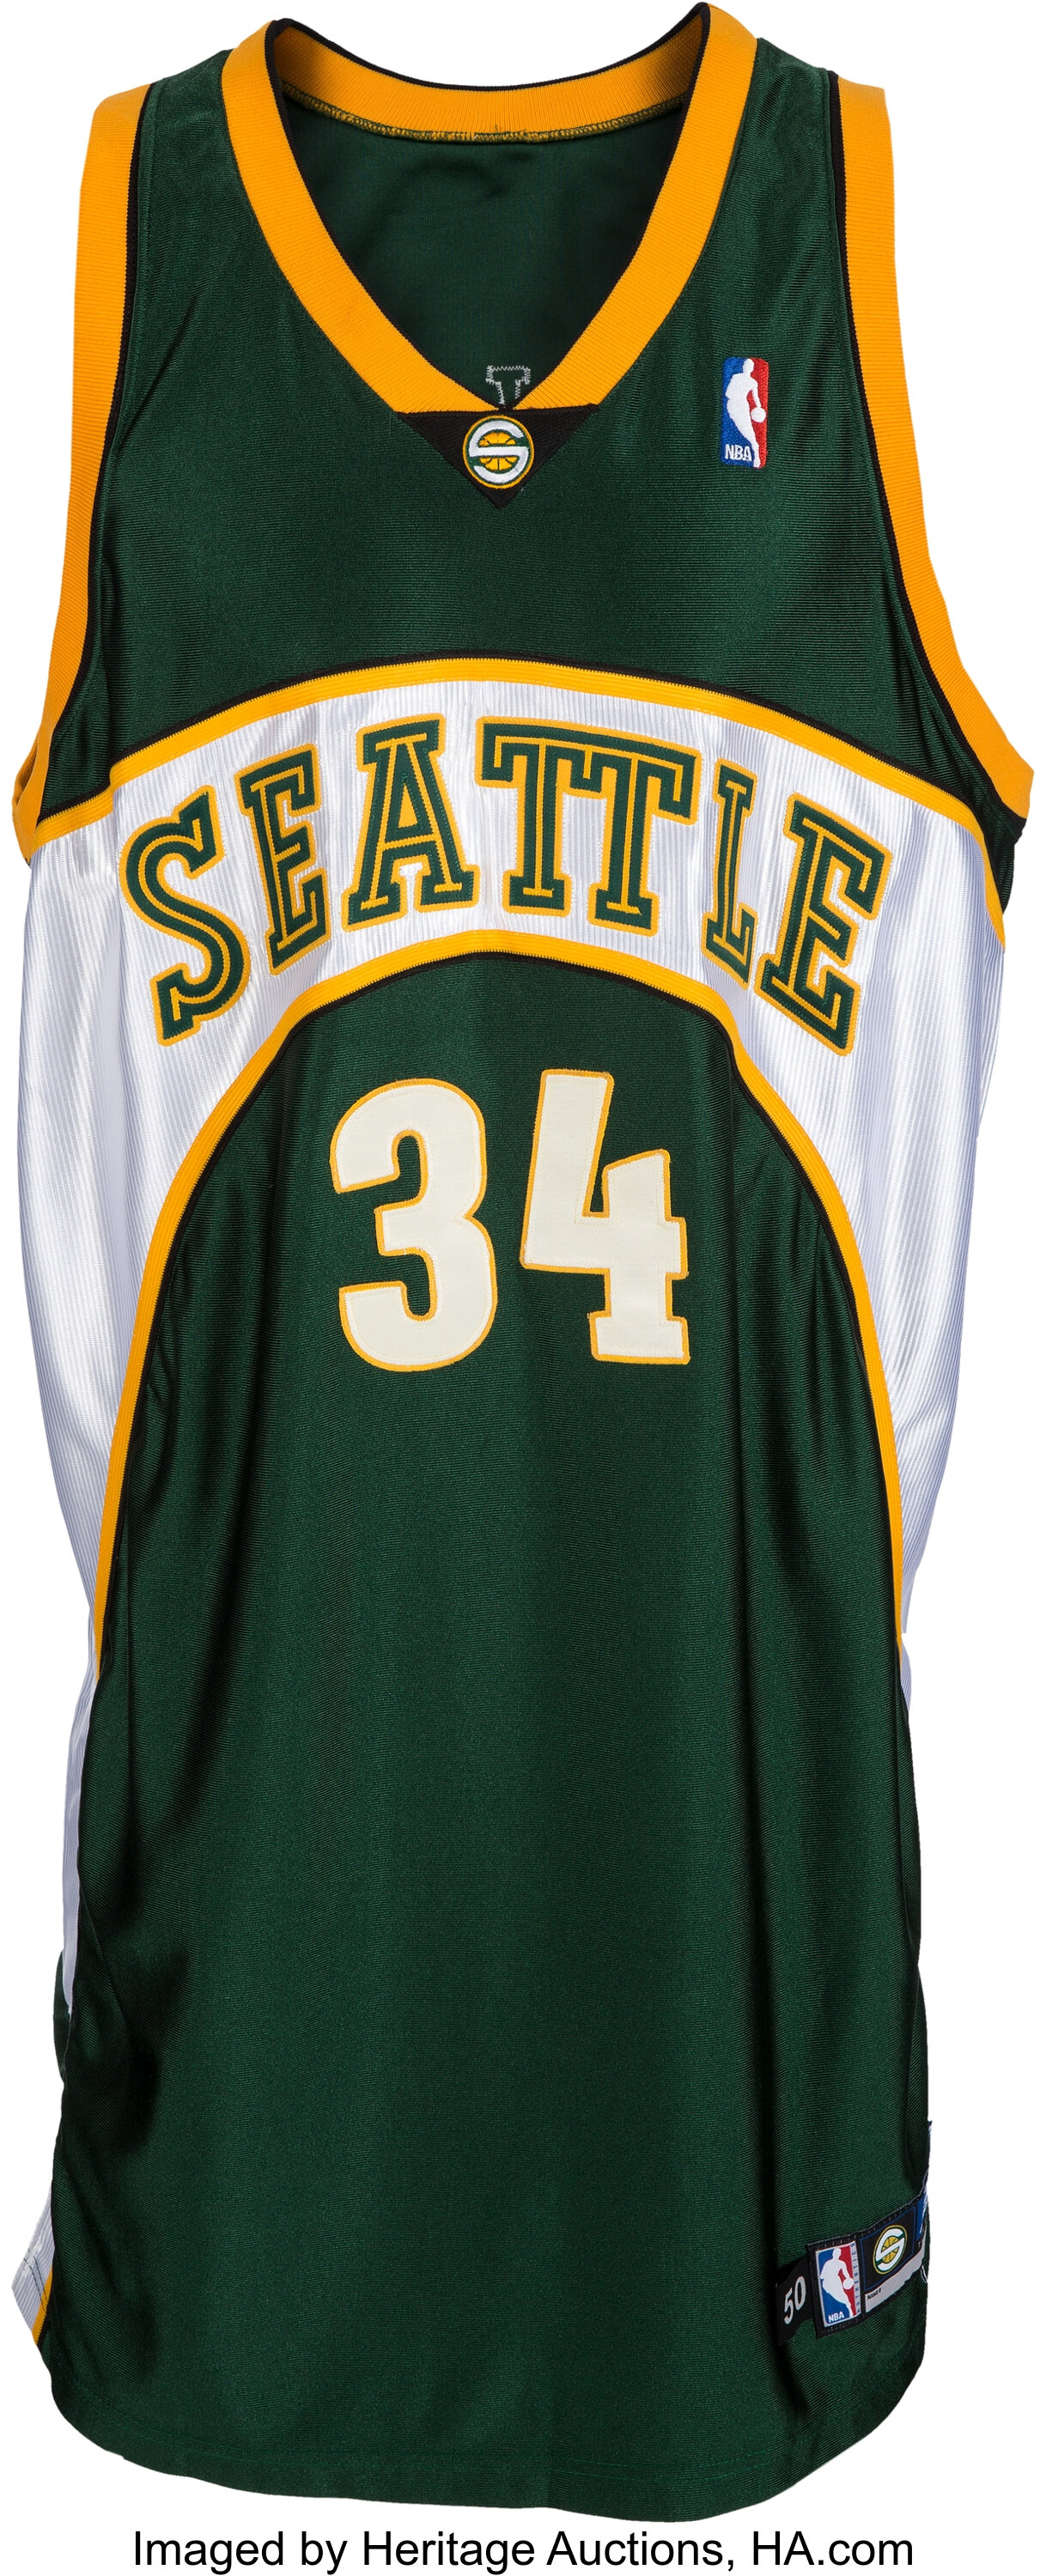 2004-05 Ray Allen Game Worn Seattle Supersonics Jersey., Lot #83011